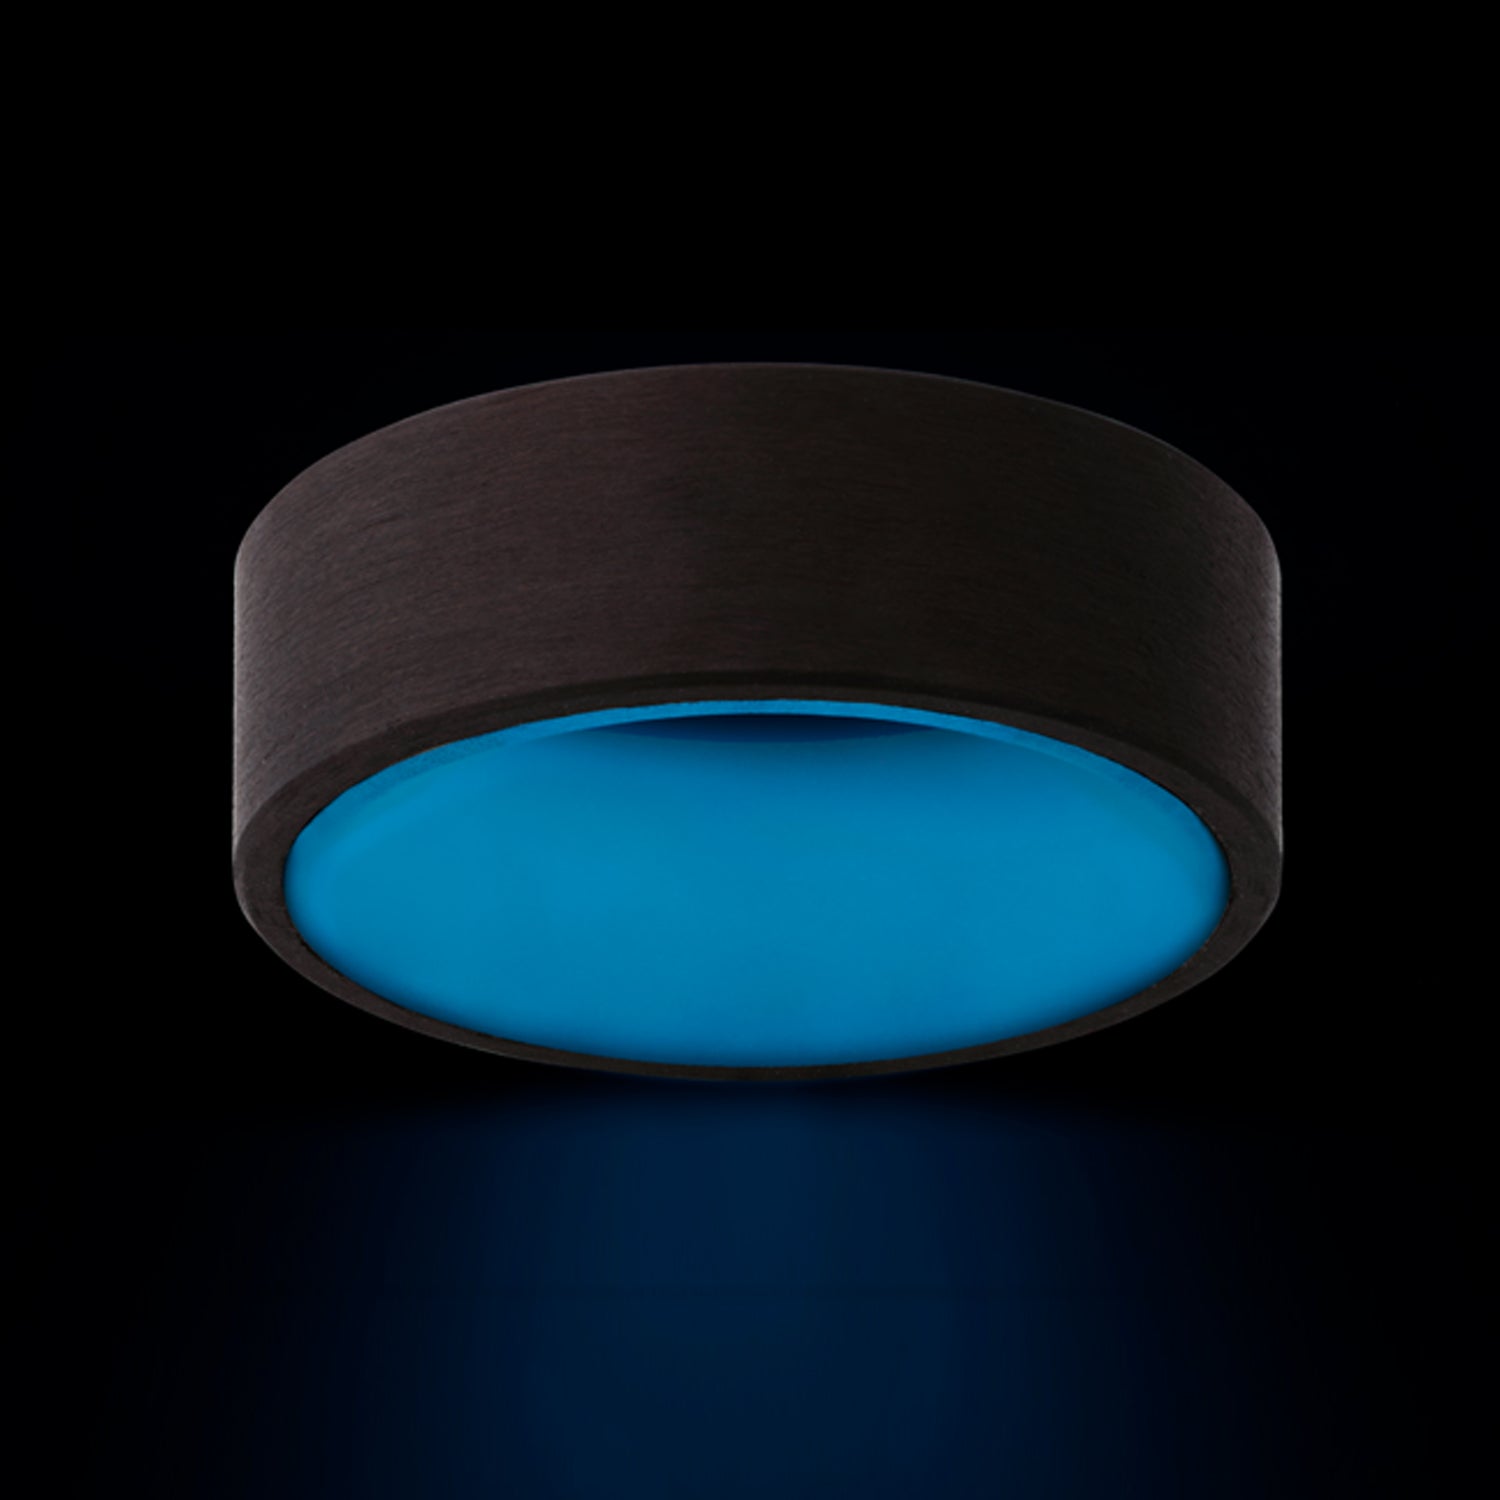 Glow in the Dark Carbon Fiber Wedding Band with Contrasting Blue Center